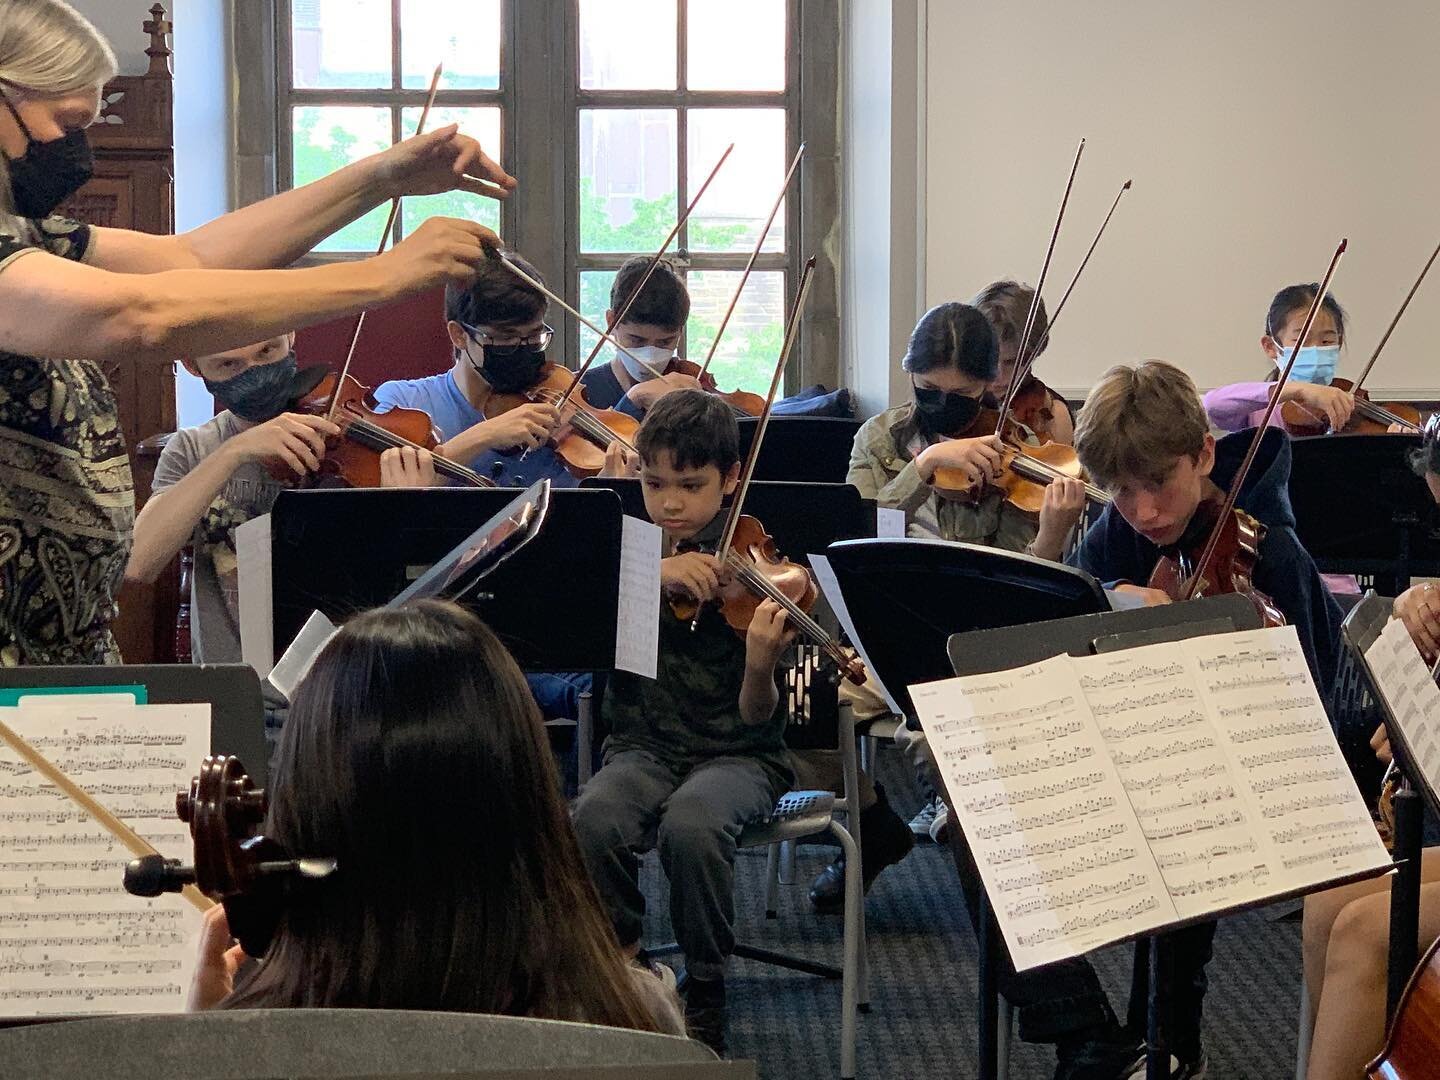 Be INSPIRED. Tomorrow, May 27th at 7pm @ River Side Church Theatre. Join us for our Orchestras Concert led by Sibylle Johner. 

This concert will feature performances by Camerata &amp; Con Brio Orchestras. Our 2022 CMC Concerto Competition Winner, Gr